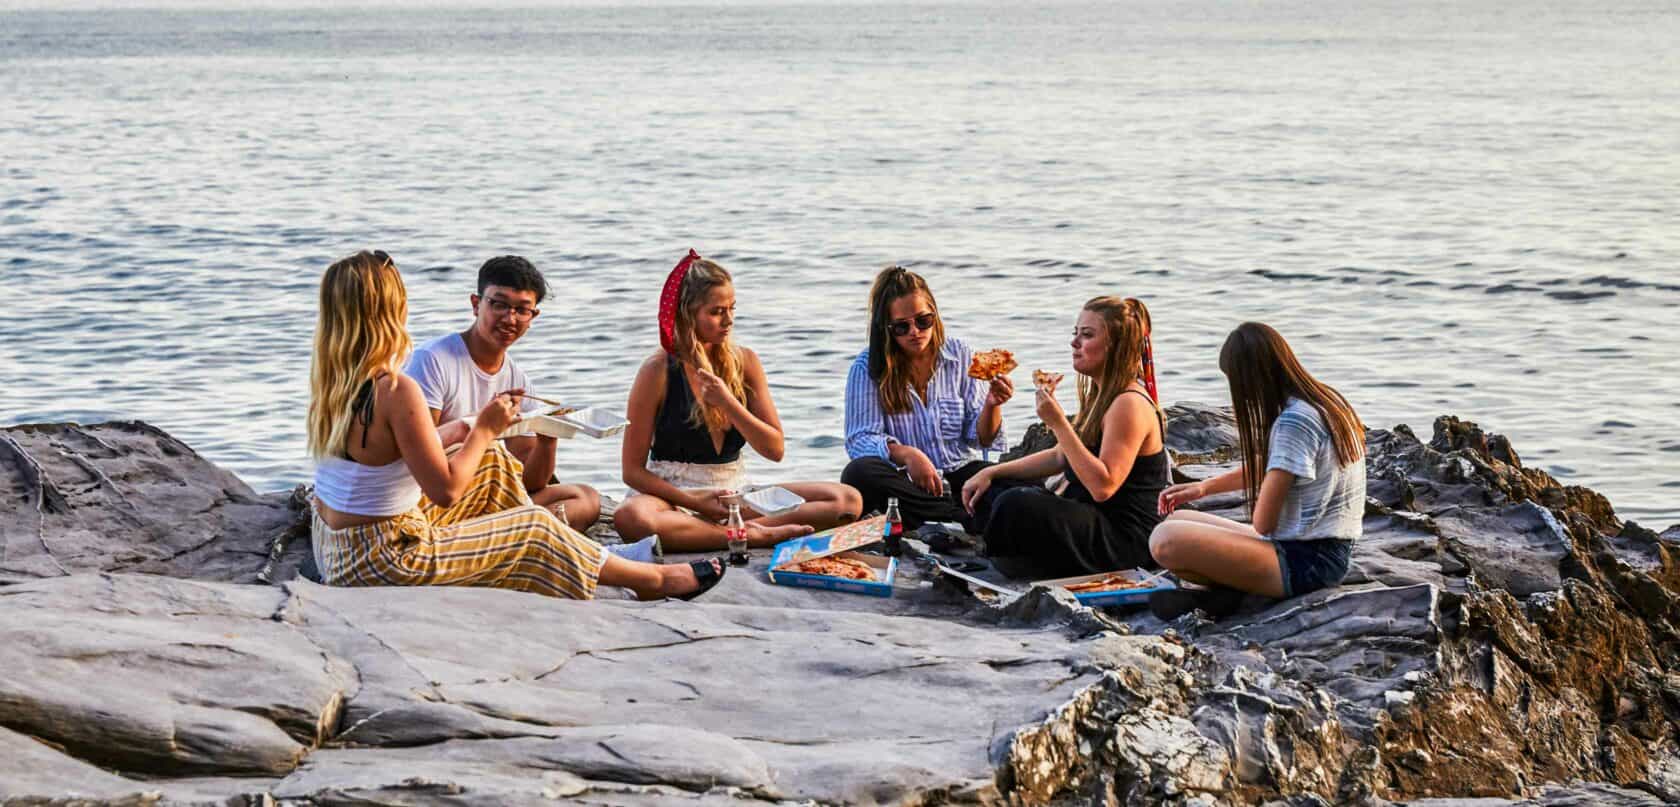 Friends sitting on a rock near the ocean eating food.